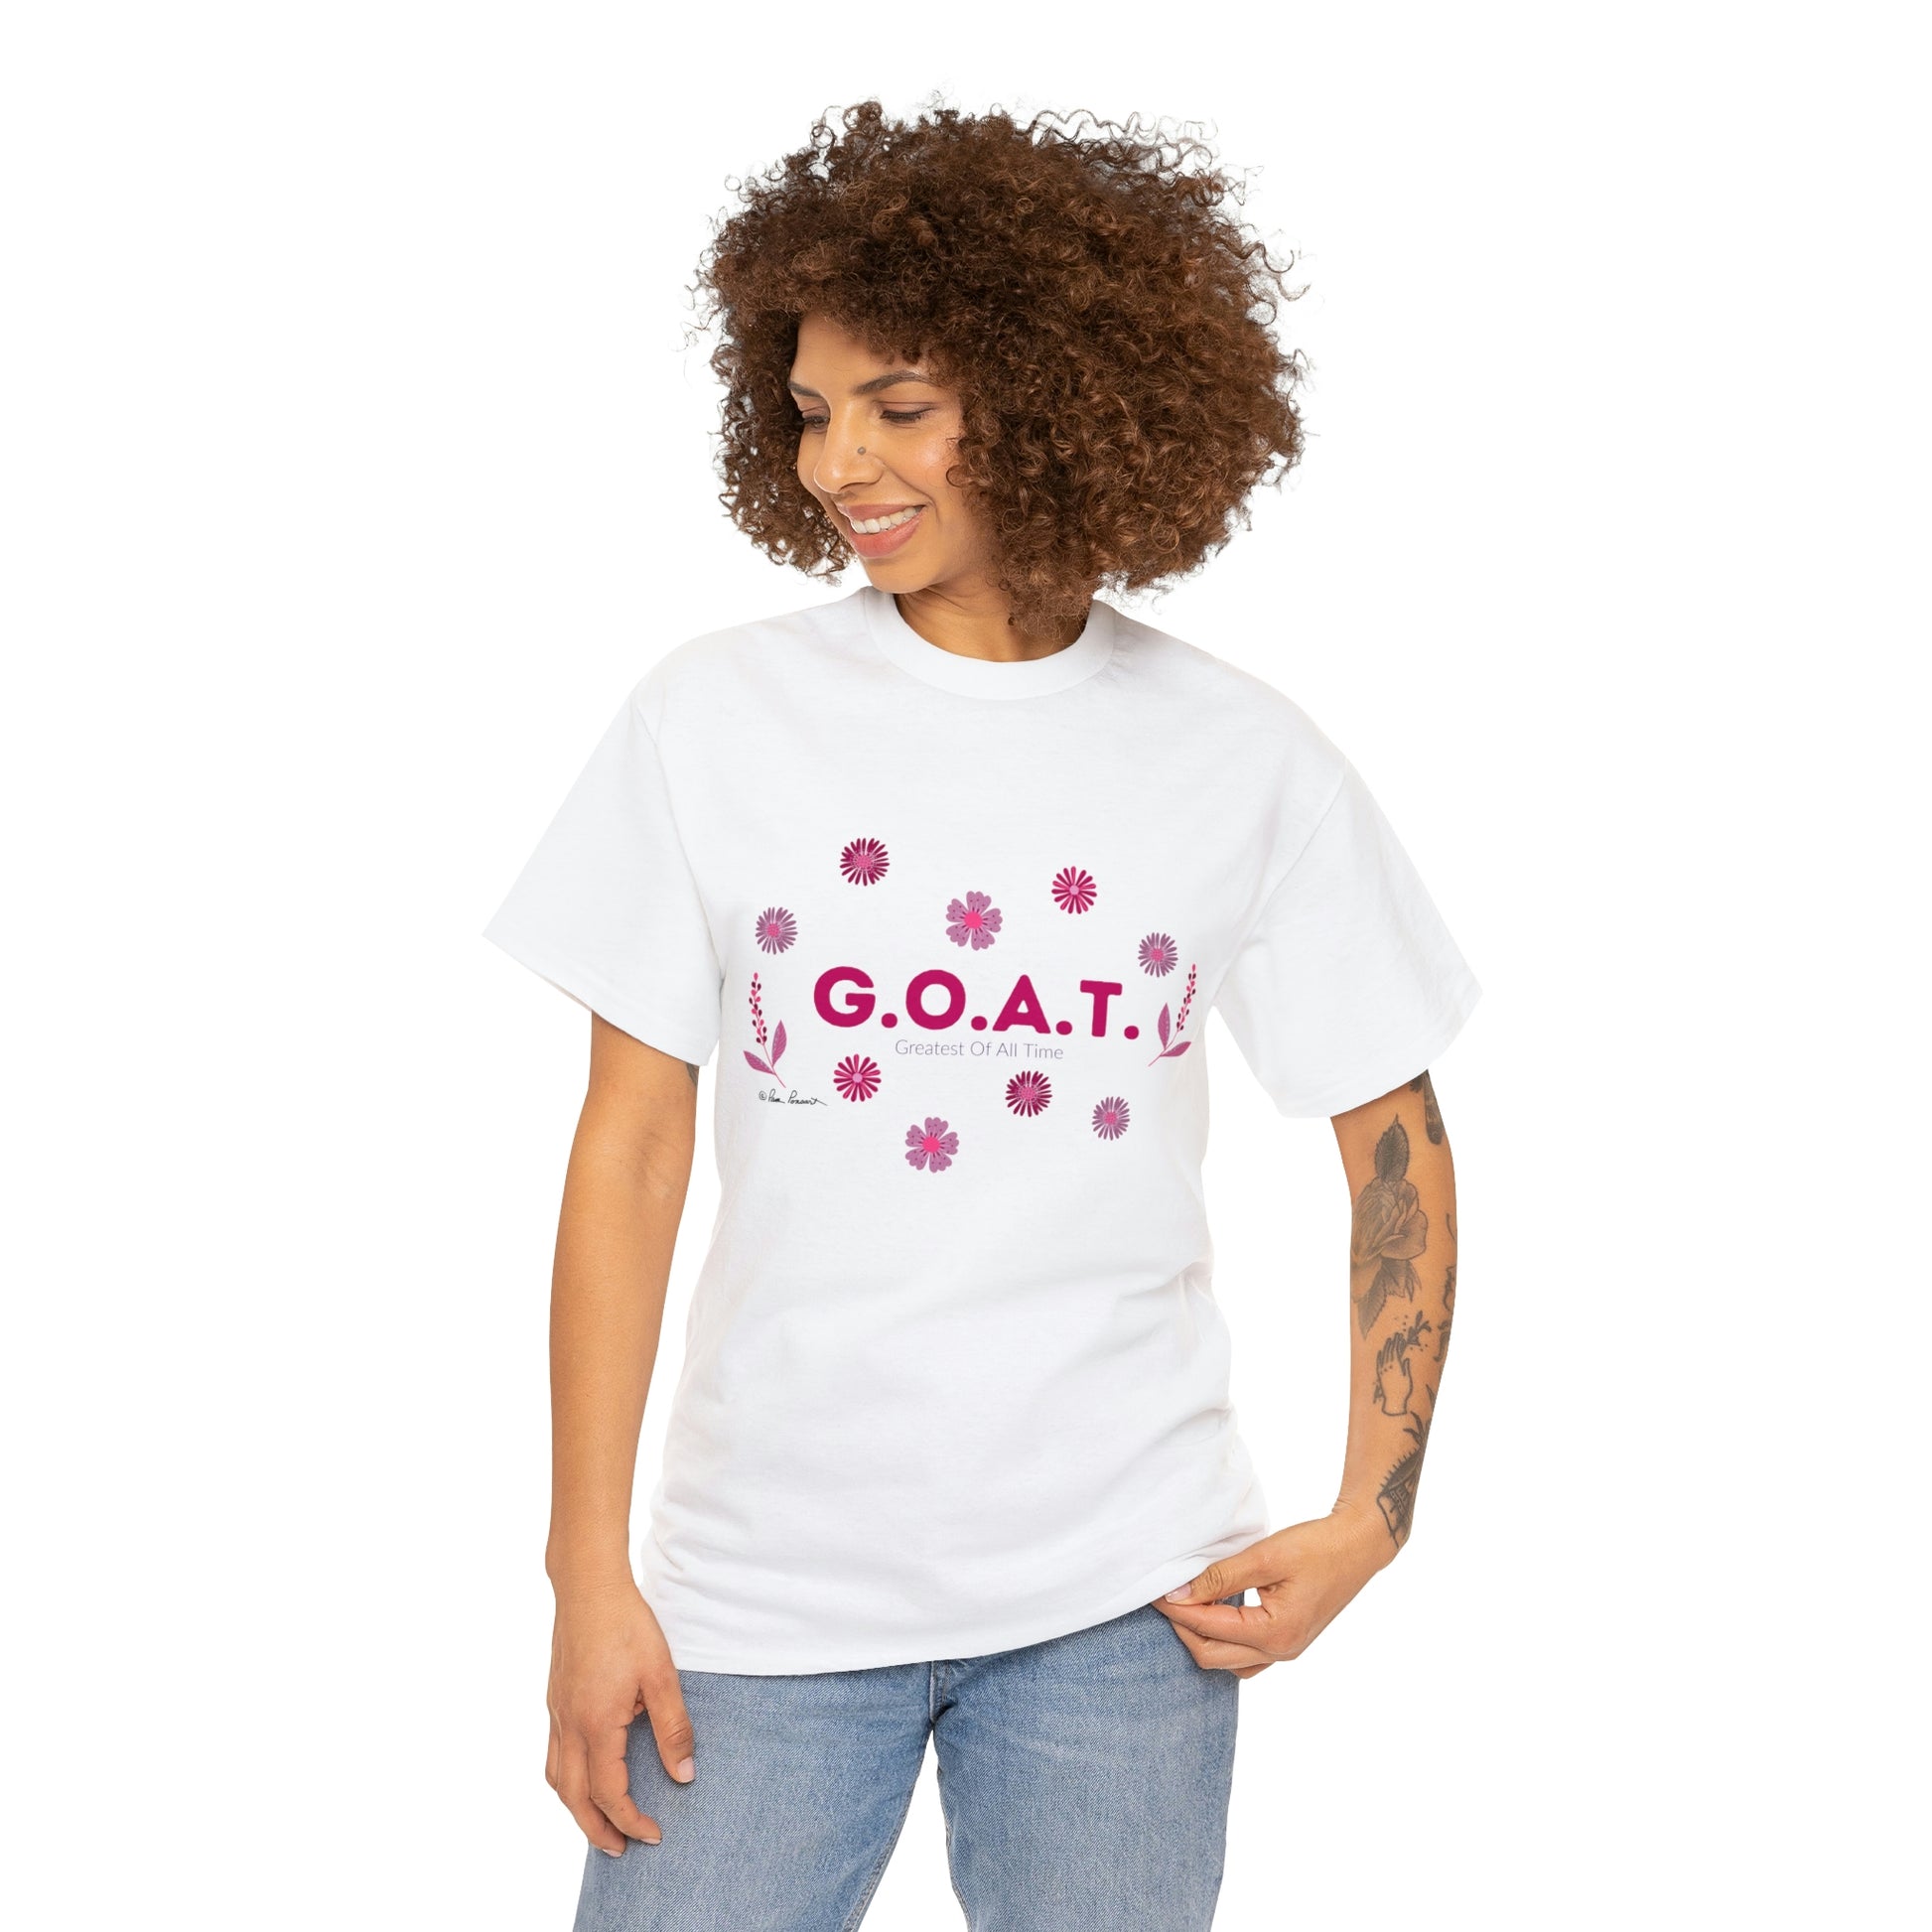 Mock up of a slim woman wearing the white t-shirt